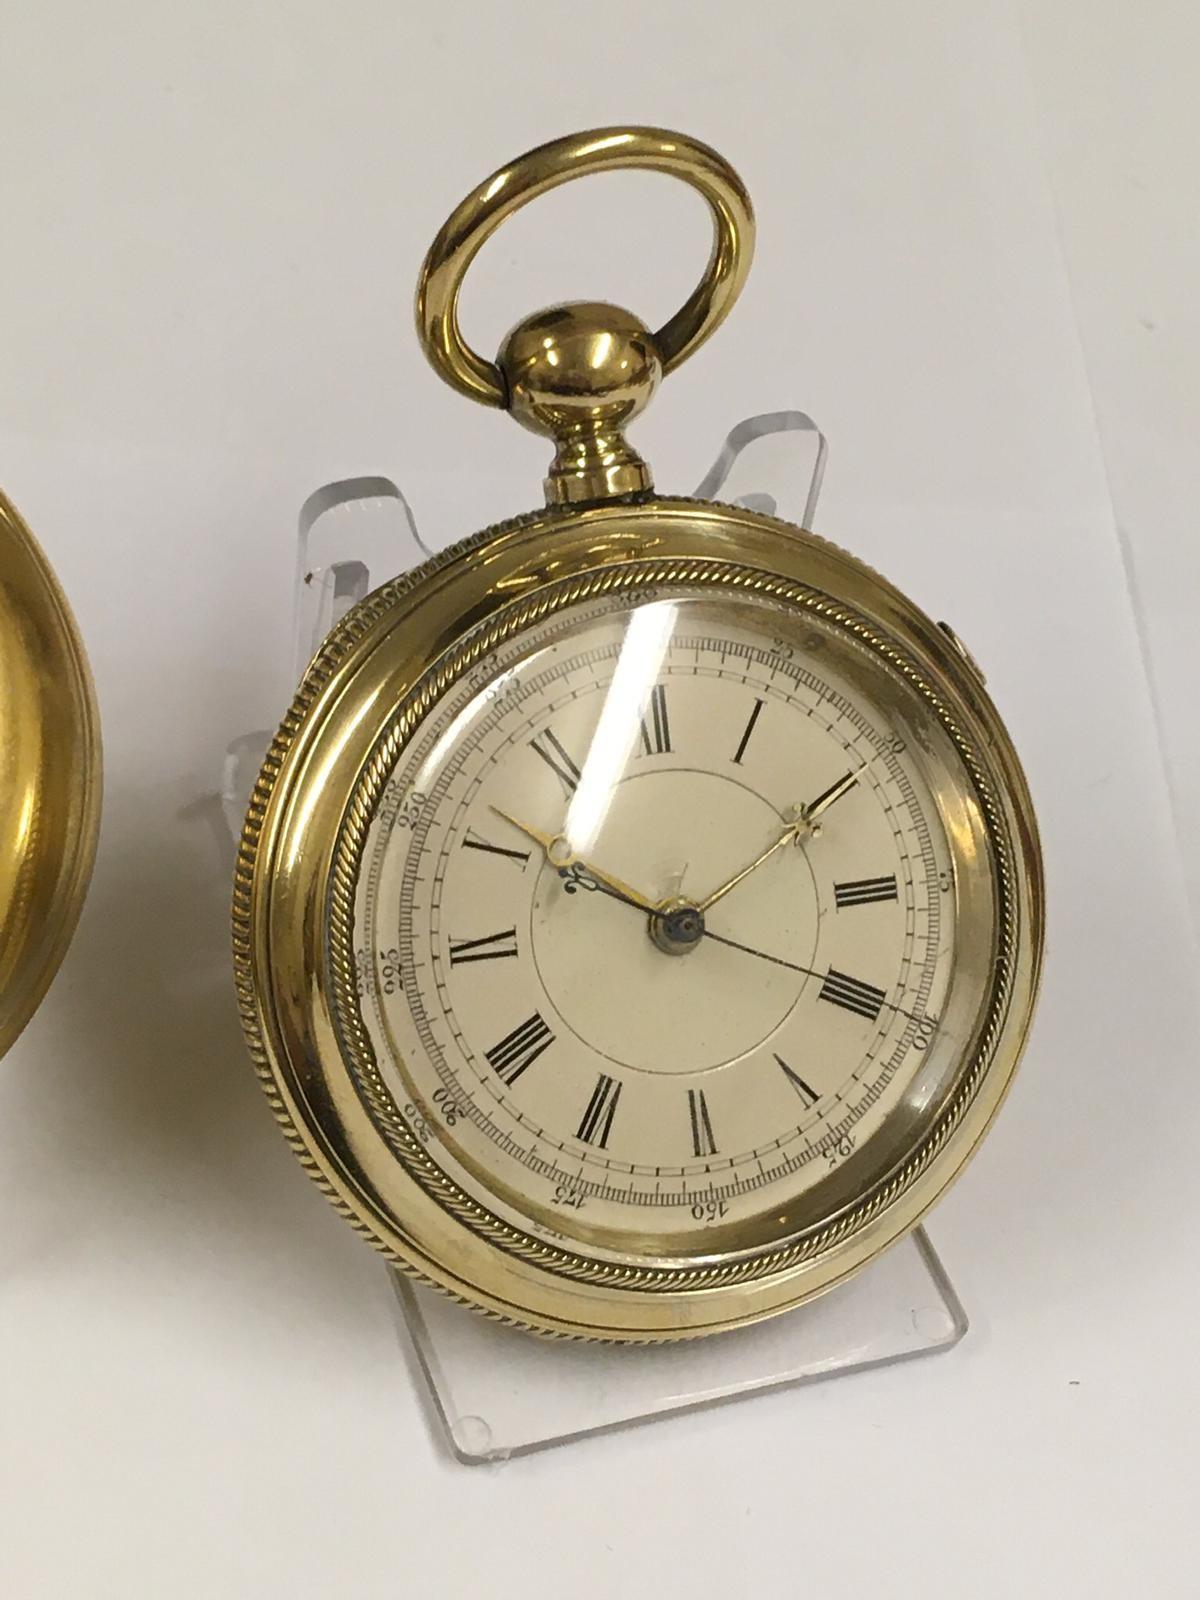 Antique Goliath pocket watch and very large antique Chronograph pocket watch (2) - Image 7 of 11